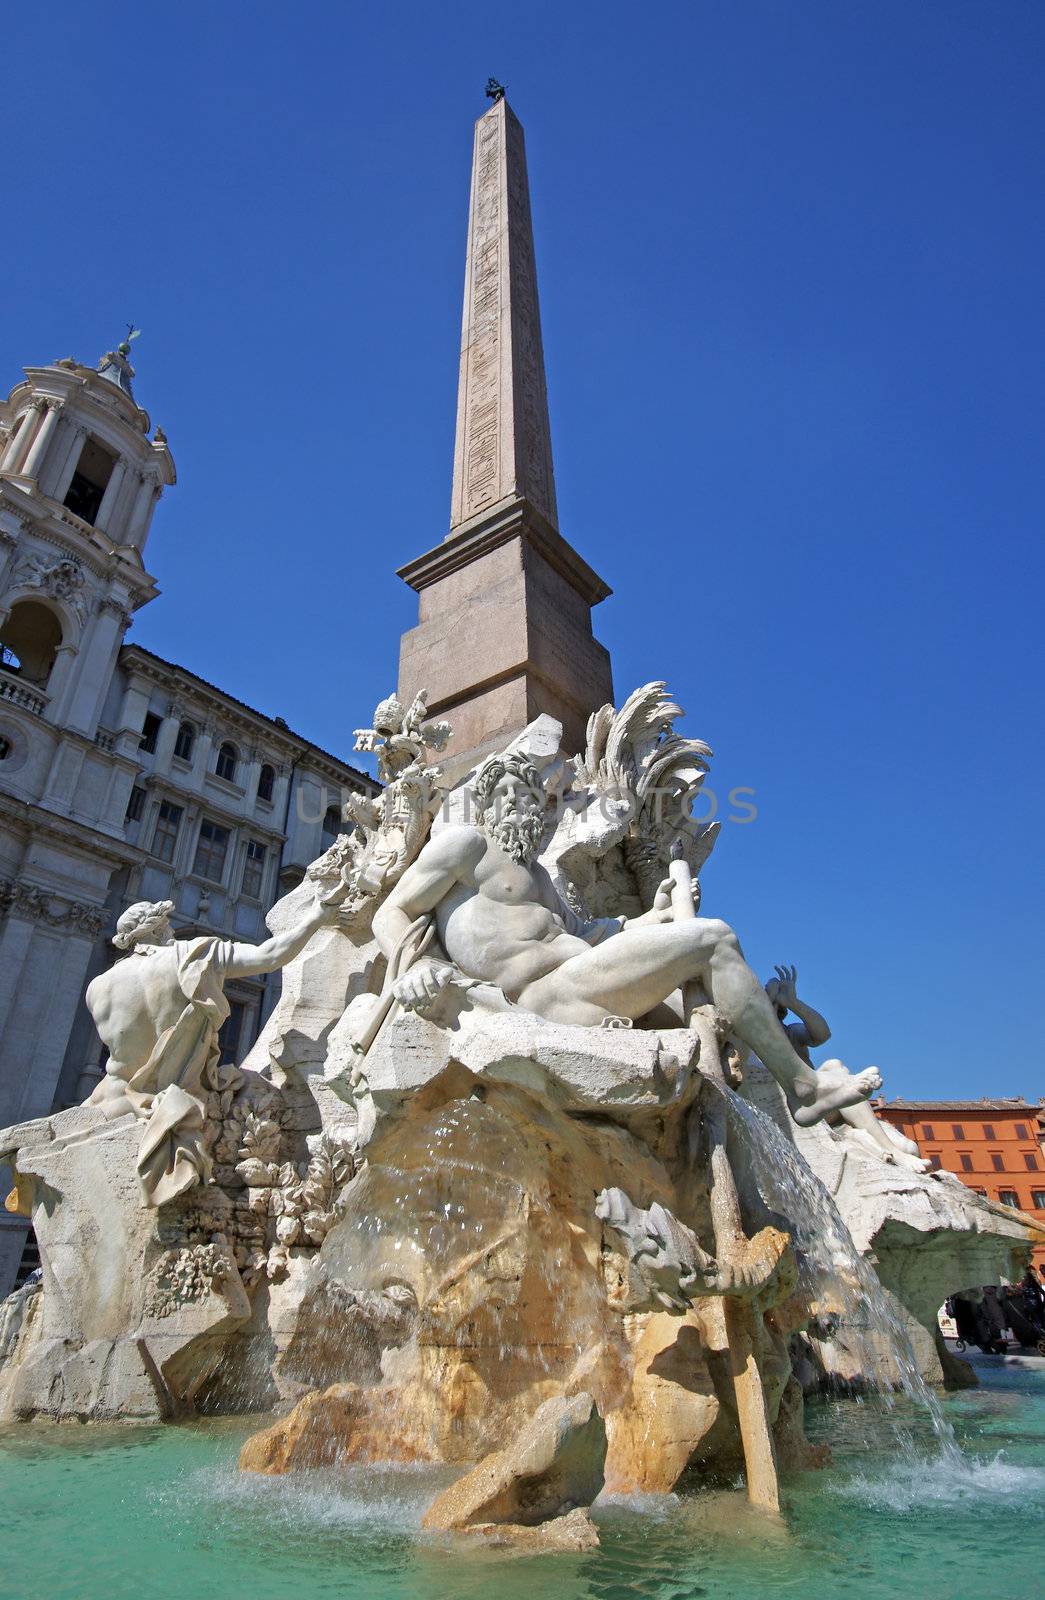 Beautiful fountain (Fontana dei Quattro Fiumi or Fountain of the Four Rivers) with an Egyptian obelisk in Piazza Navona, Rome